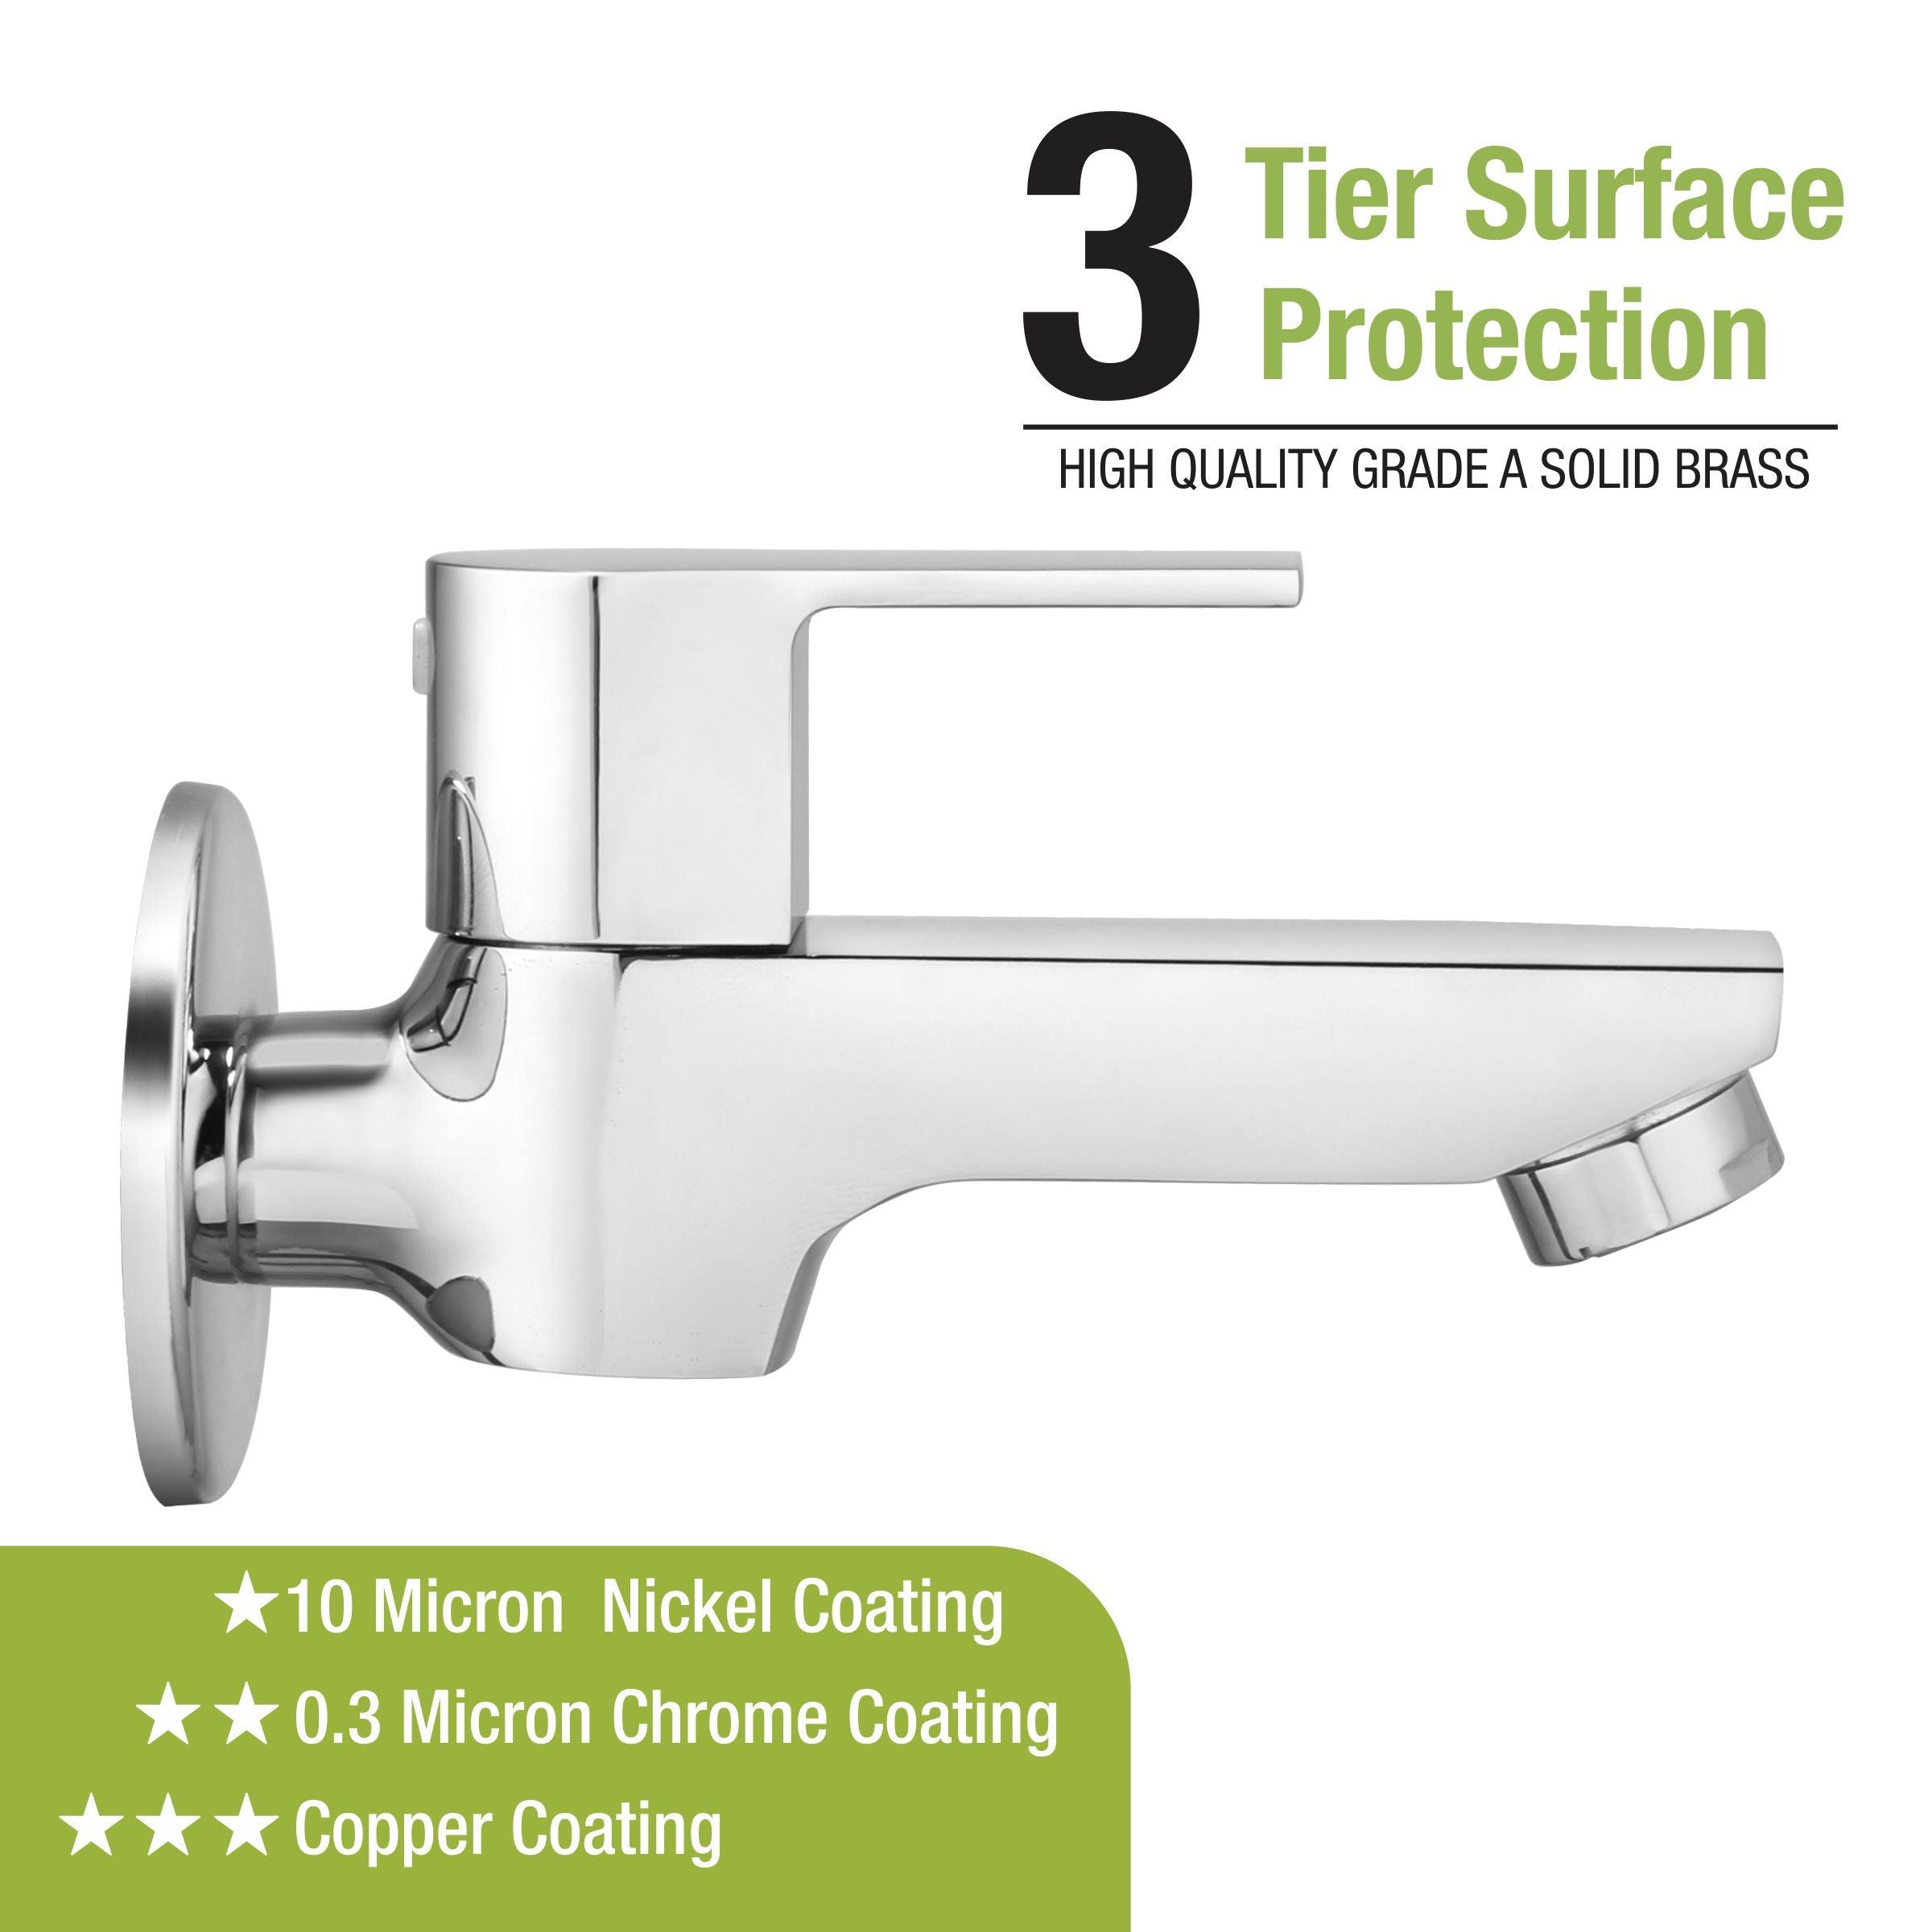 Victory Bib Tap Long Body Brass Faucet 3 tier surface protection